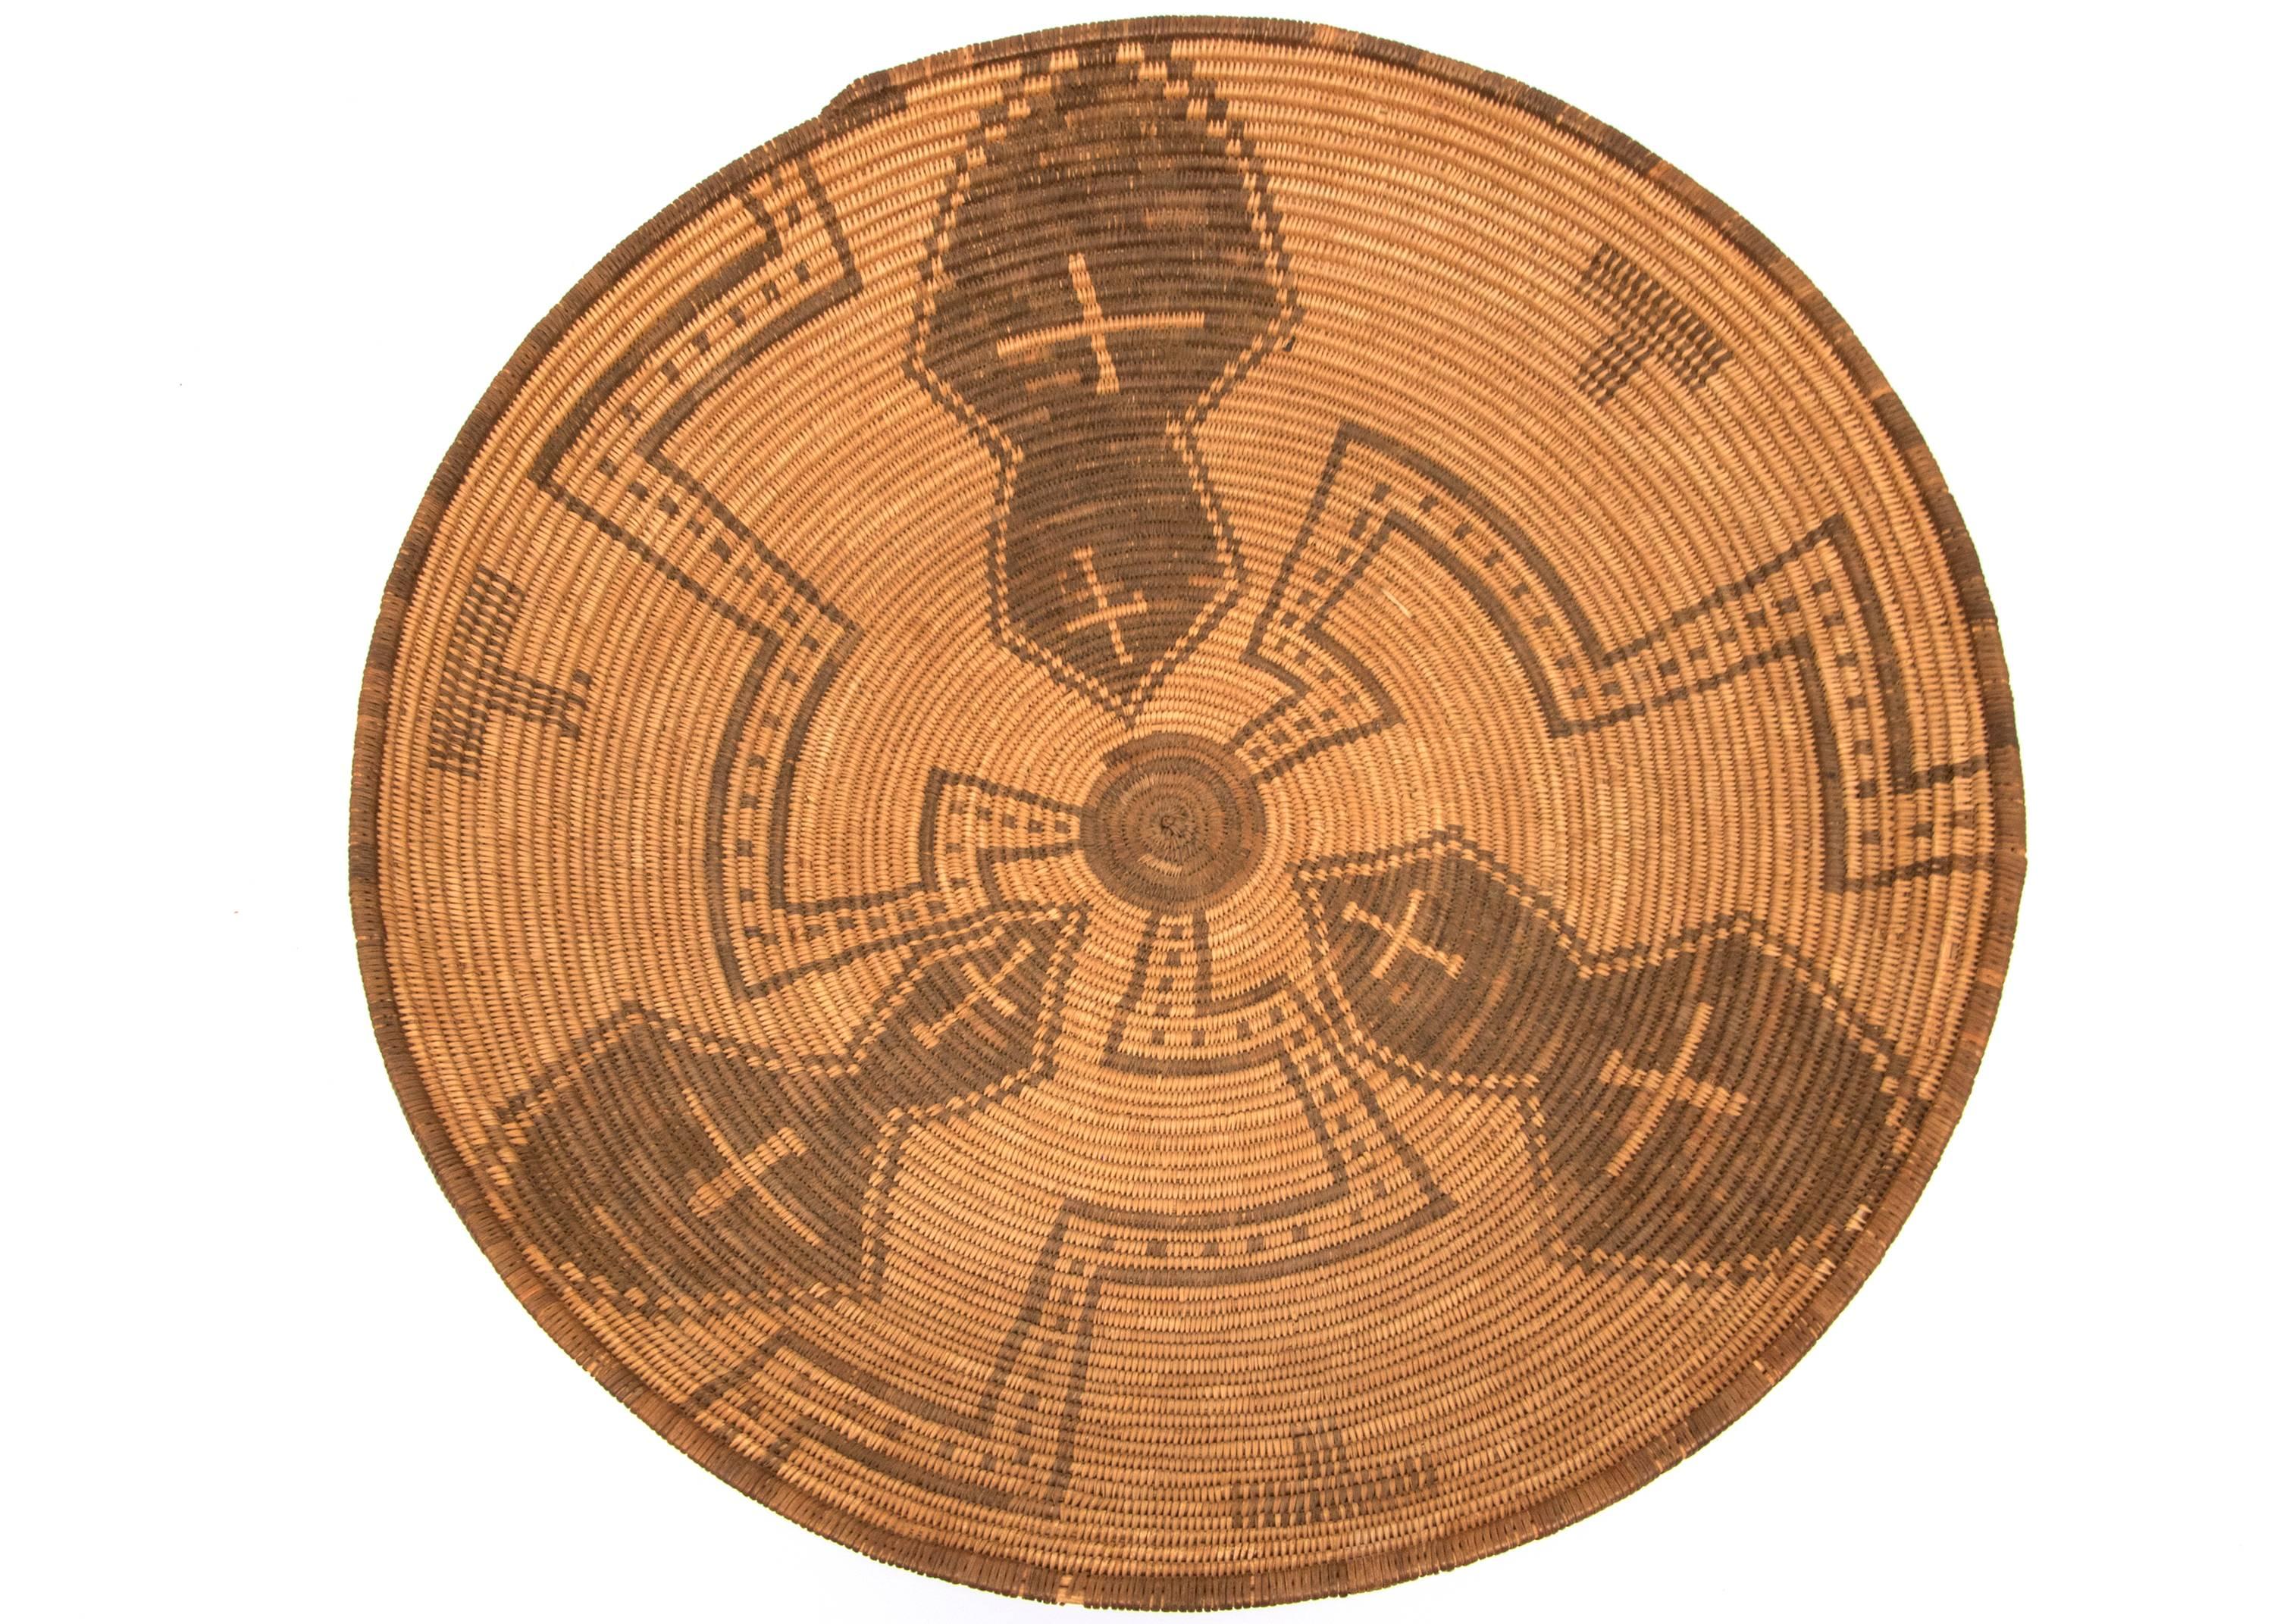 Vintage 19th century, circa 1890, Pictorial Apache (North American Indian) basket in a rounded bowl/tray  form masterfully woven of willow and devil's claw with cross and meandering pinwheel elements.  The Apache, a nomadic American Plains Indian